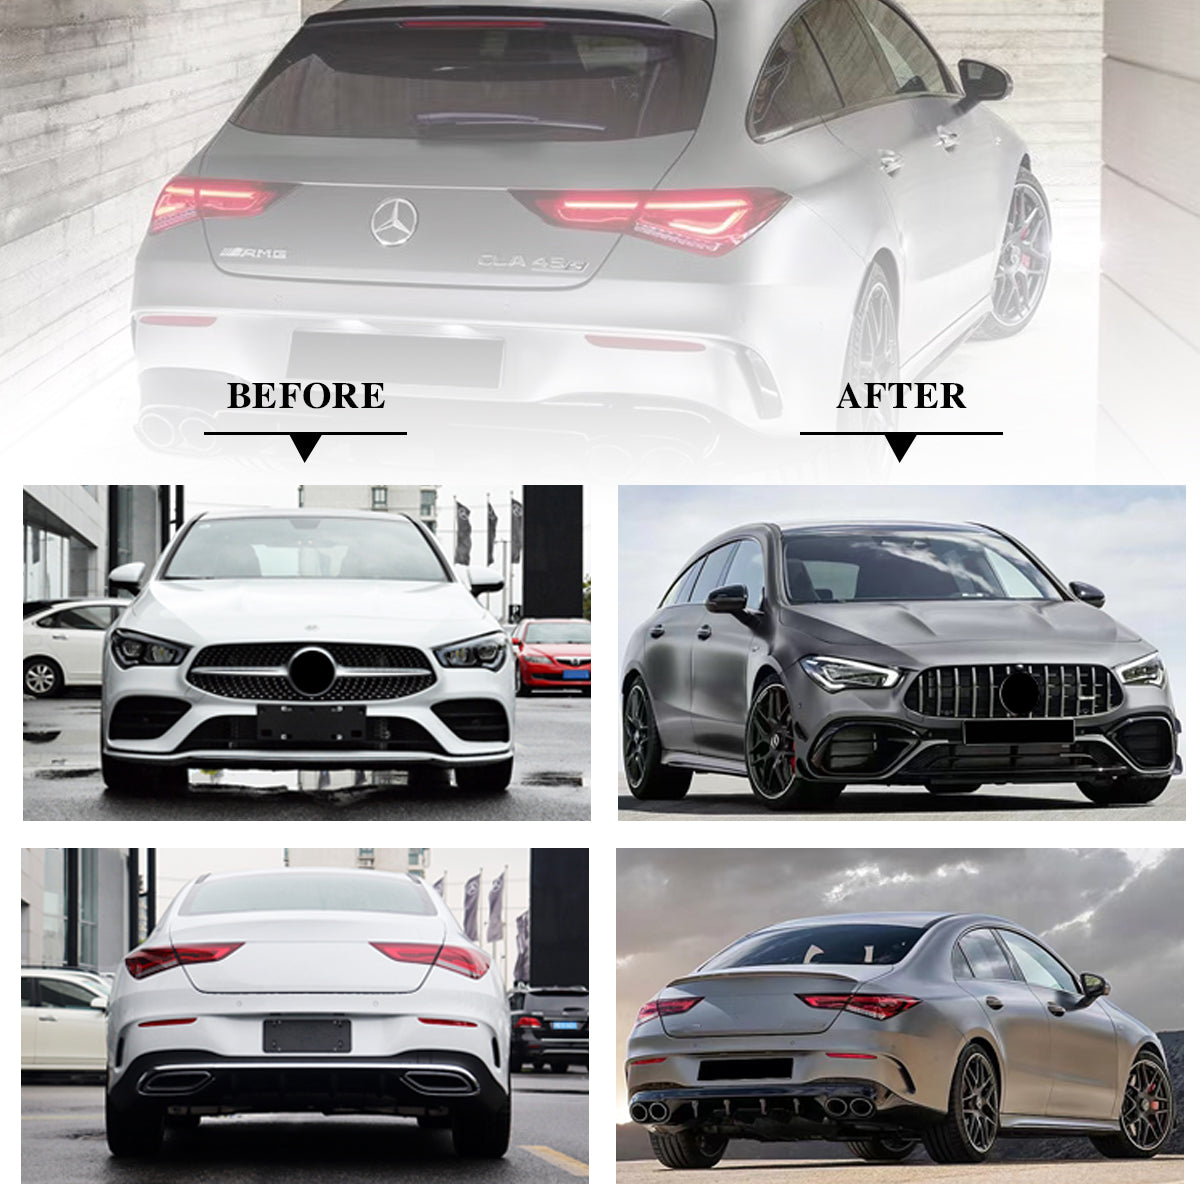 THE BODY KIT FOR W118 CLA 2018-2020 UPGRADE TO AMG